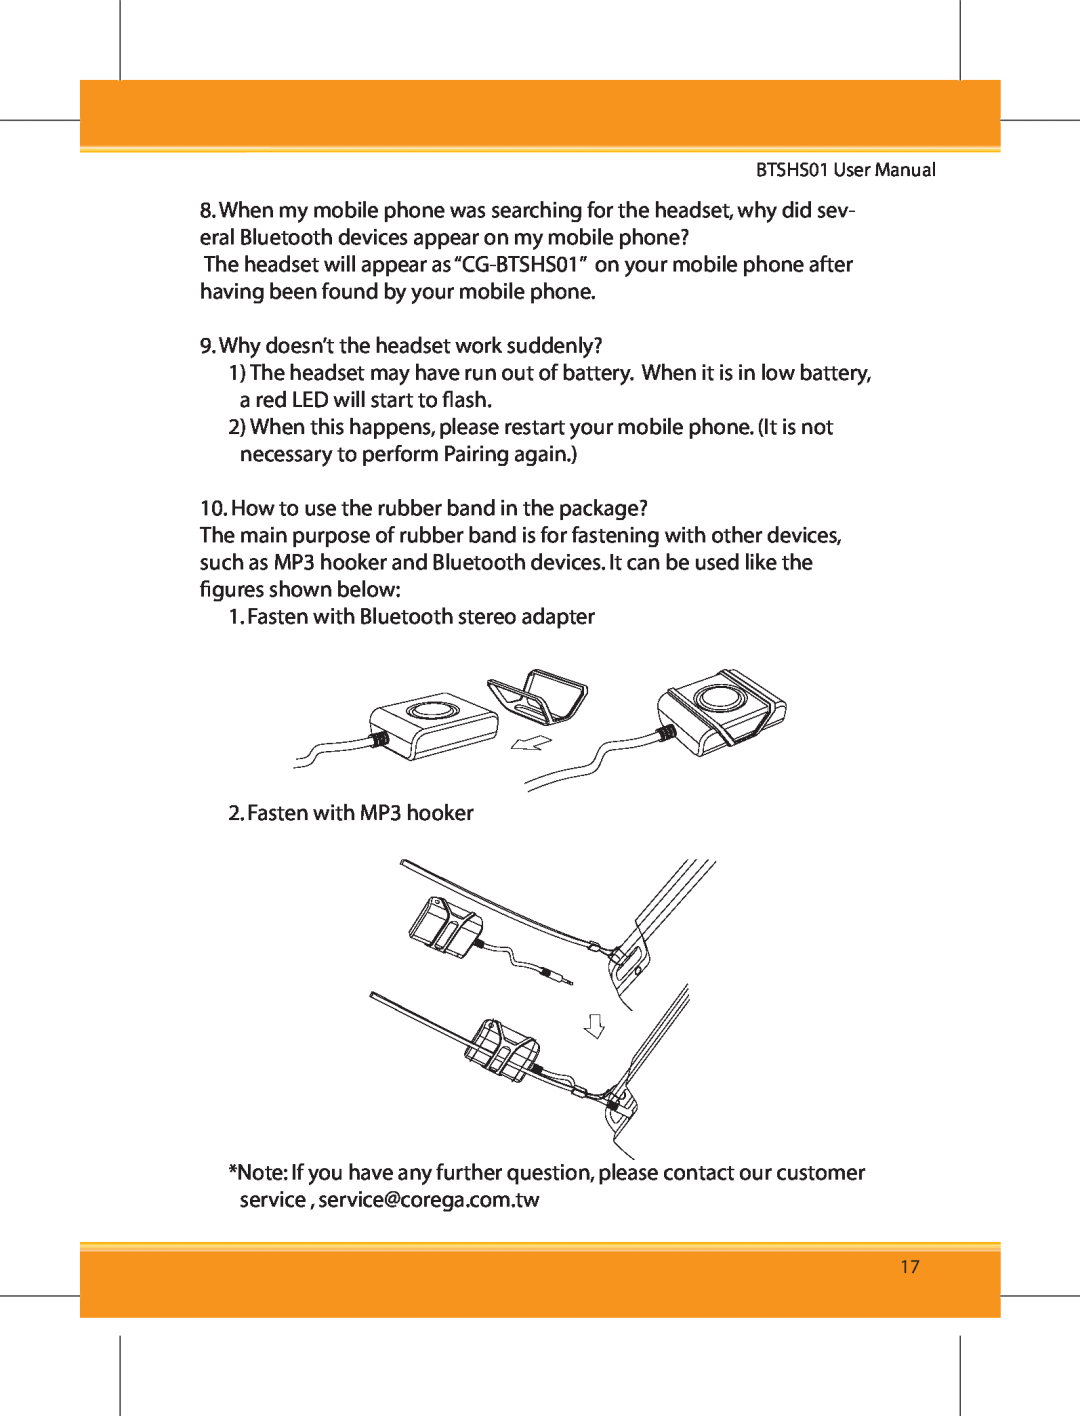 Corega BTSHS01 user manual Why doesn’t the headset work suddenly? 